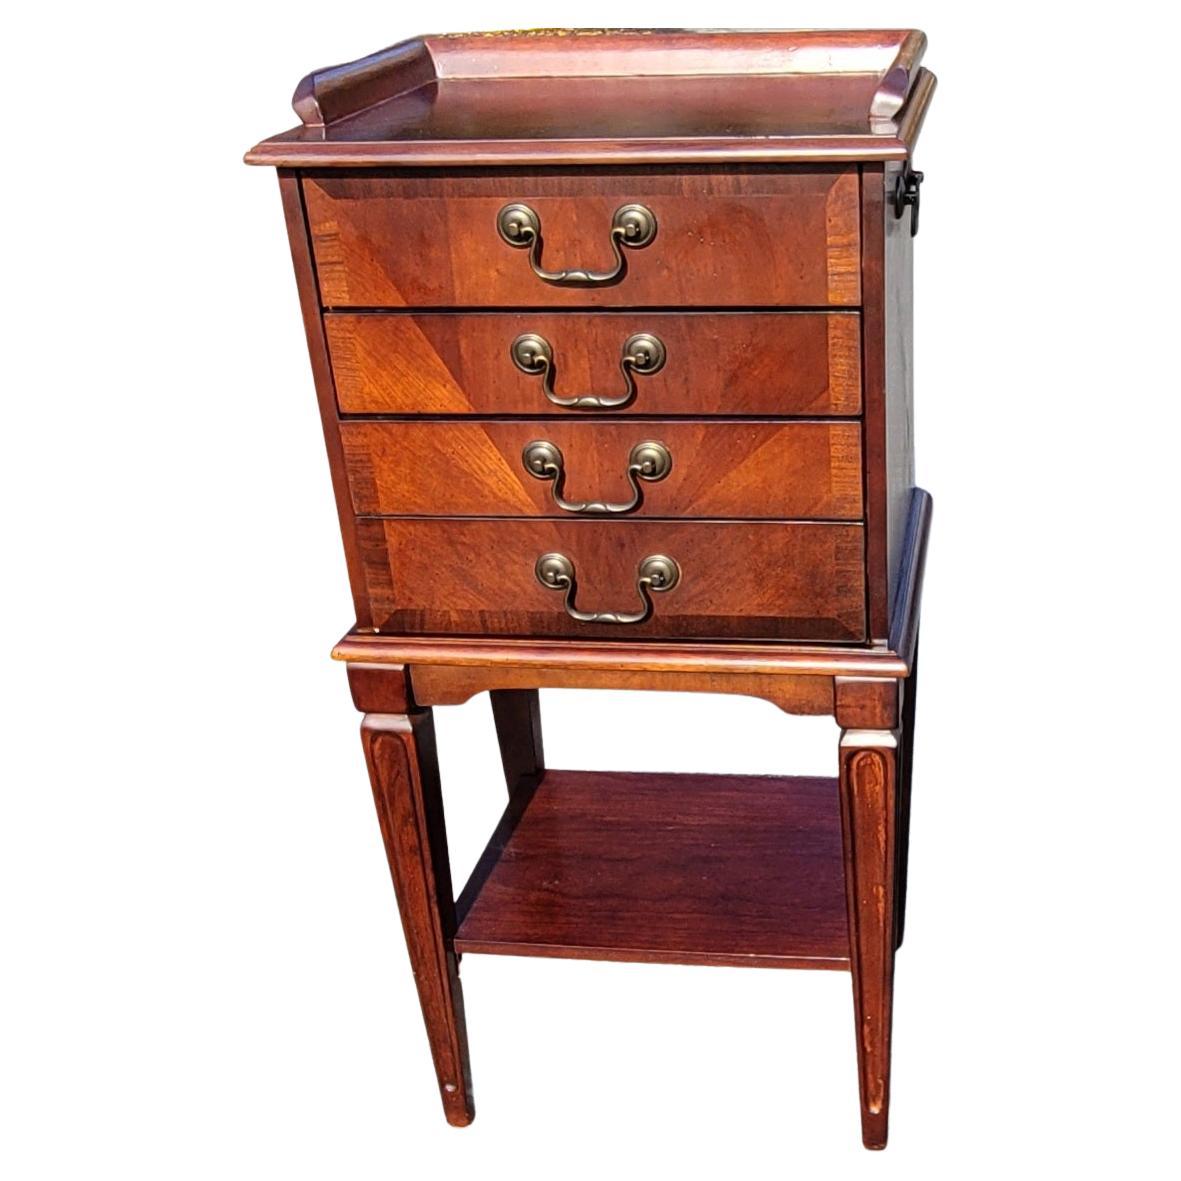 Ideal for storing dinnerware keepsakes, this silverware chest is beautiful and practical. Made of selected cherry hardwood and choice veneers, this chest boasts a Plantation Cherry finish. The bottom shelf allows you to display items, while the four